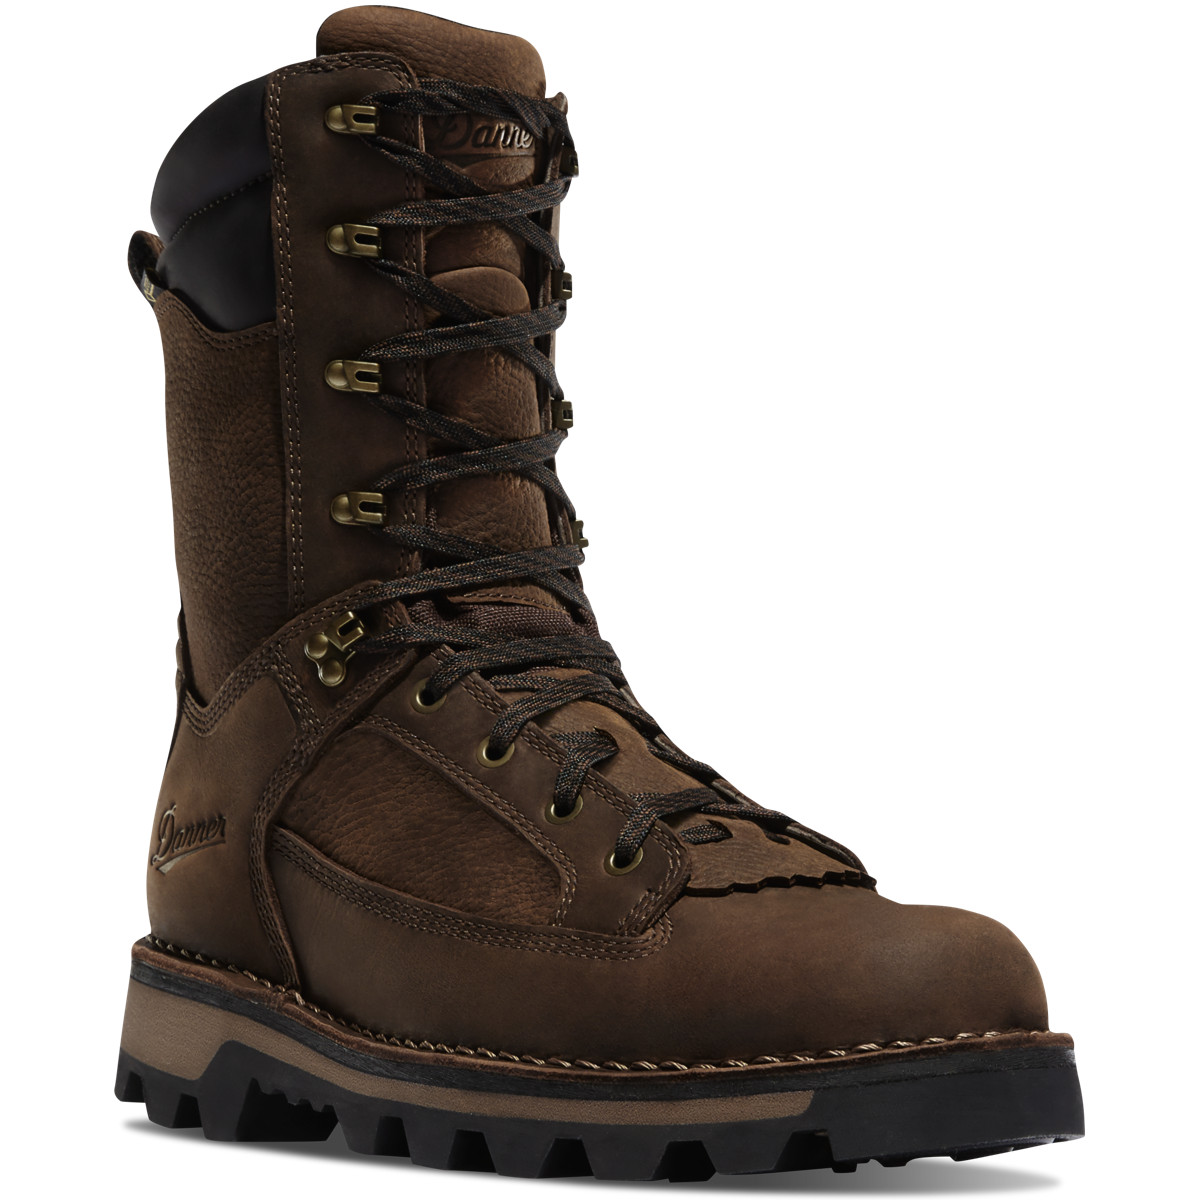 Win these Danner BOOTS!